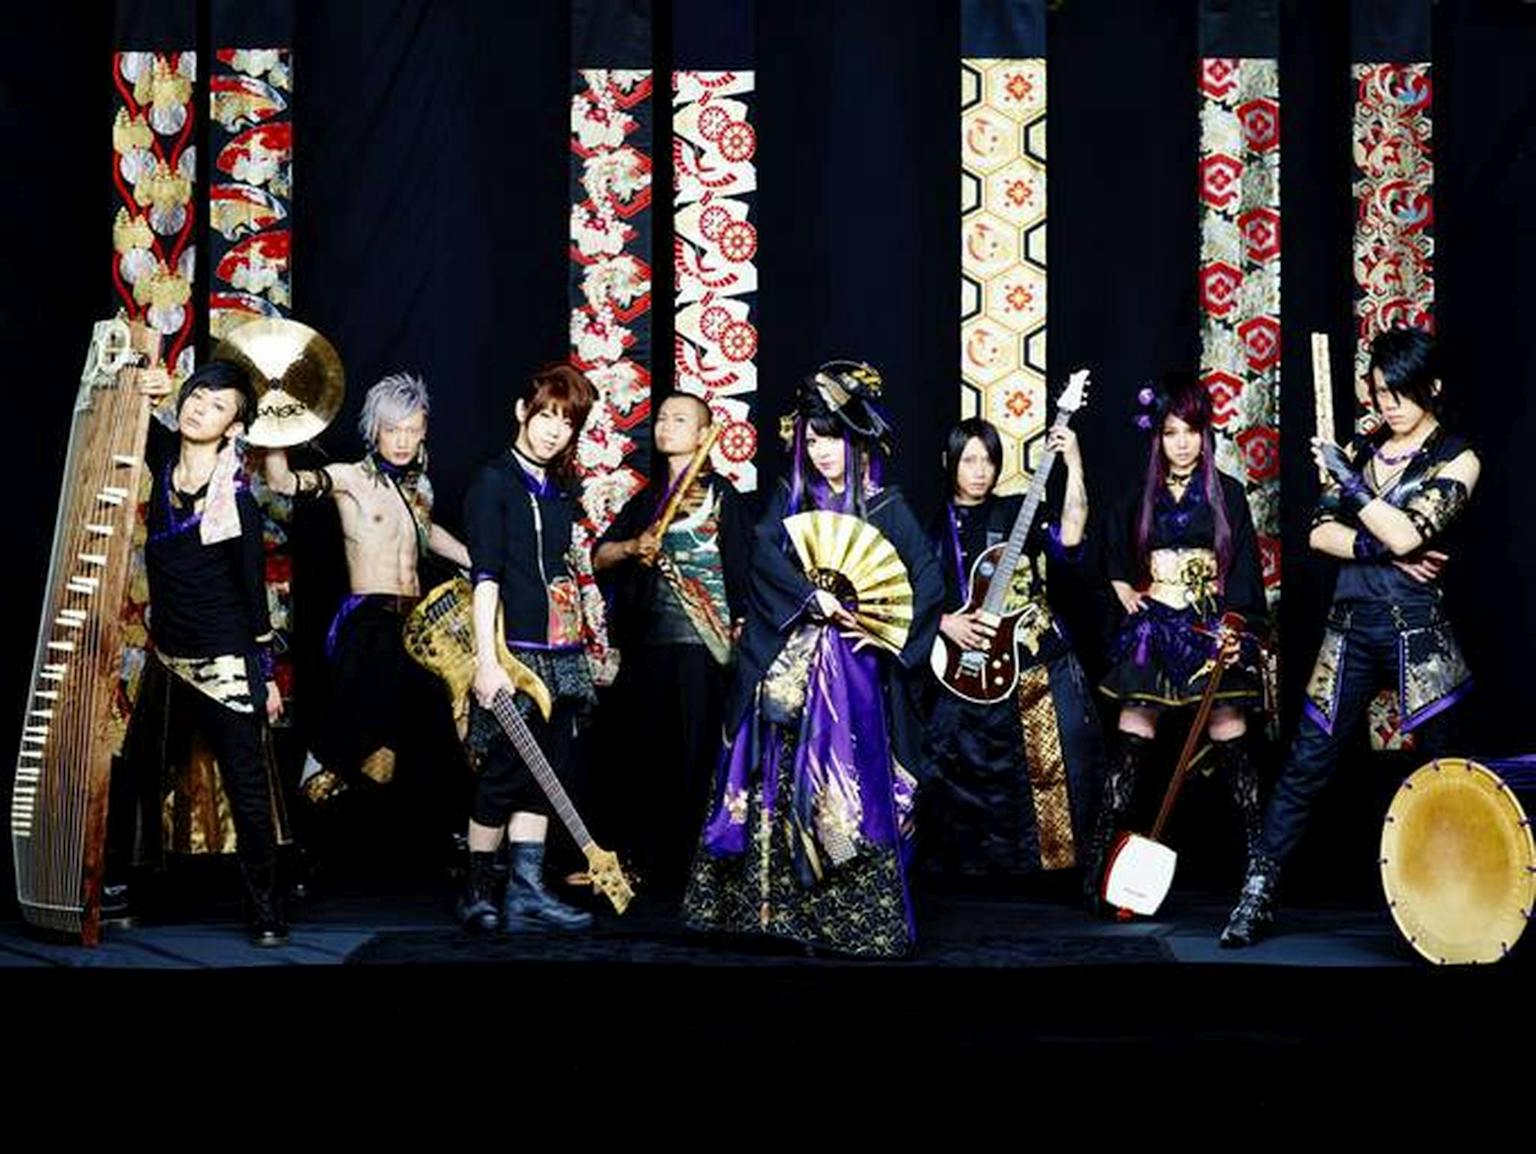 How Wagakki Band plans to conquer America